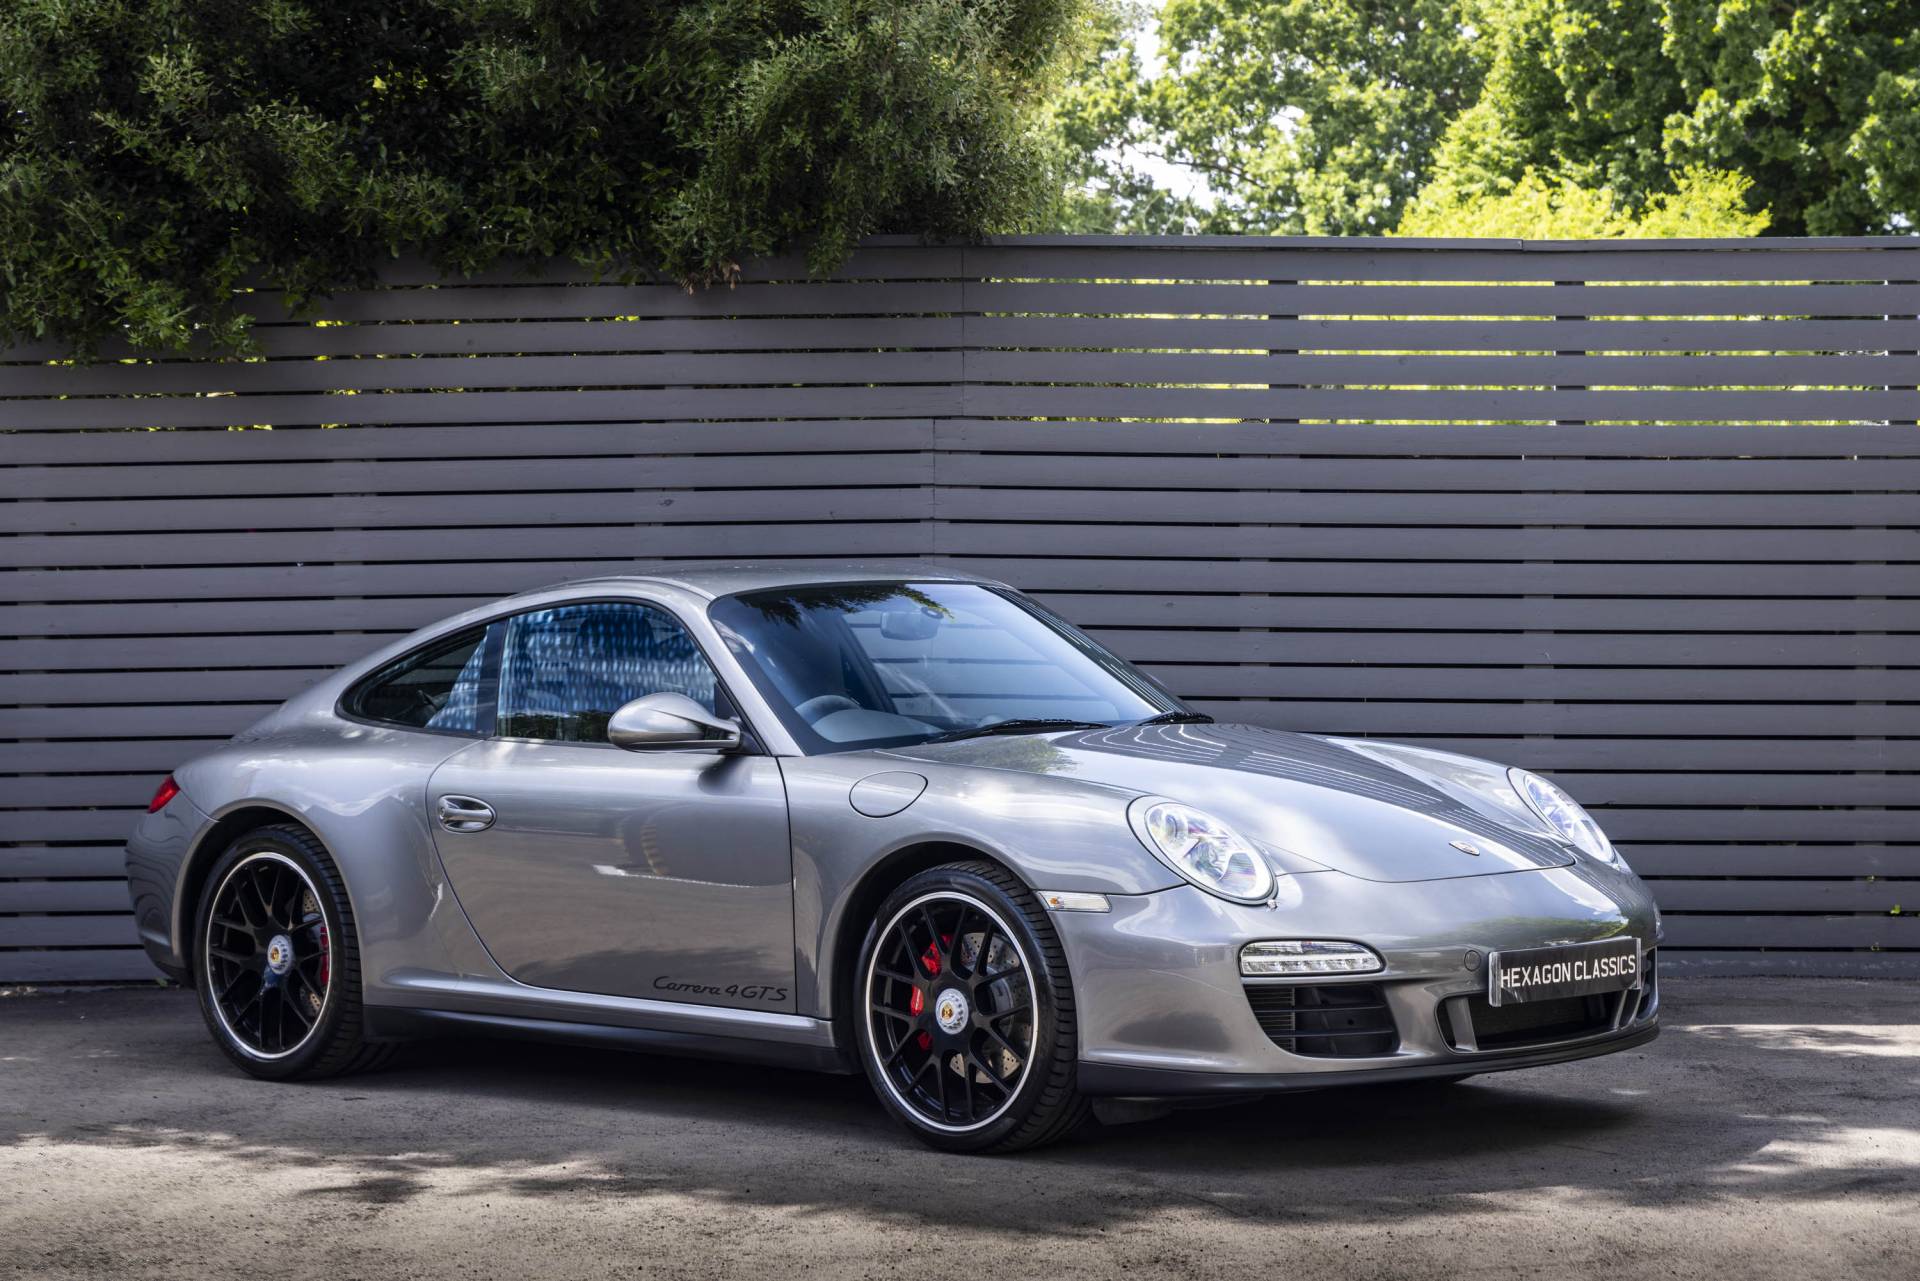 For Sale: Porsche 911 Carrera 4 GTS (2011) offered for GBP 69,995